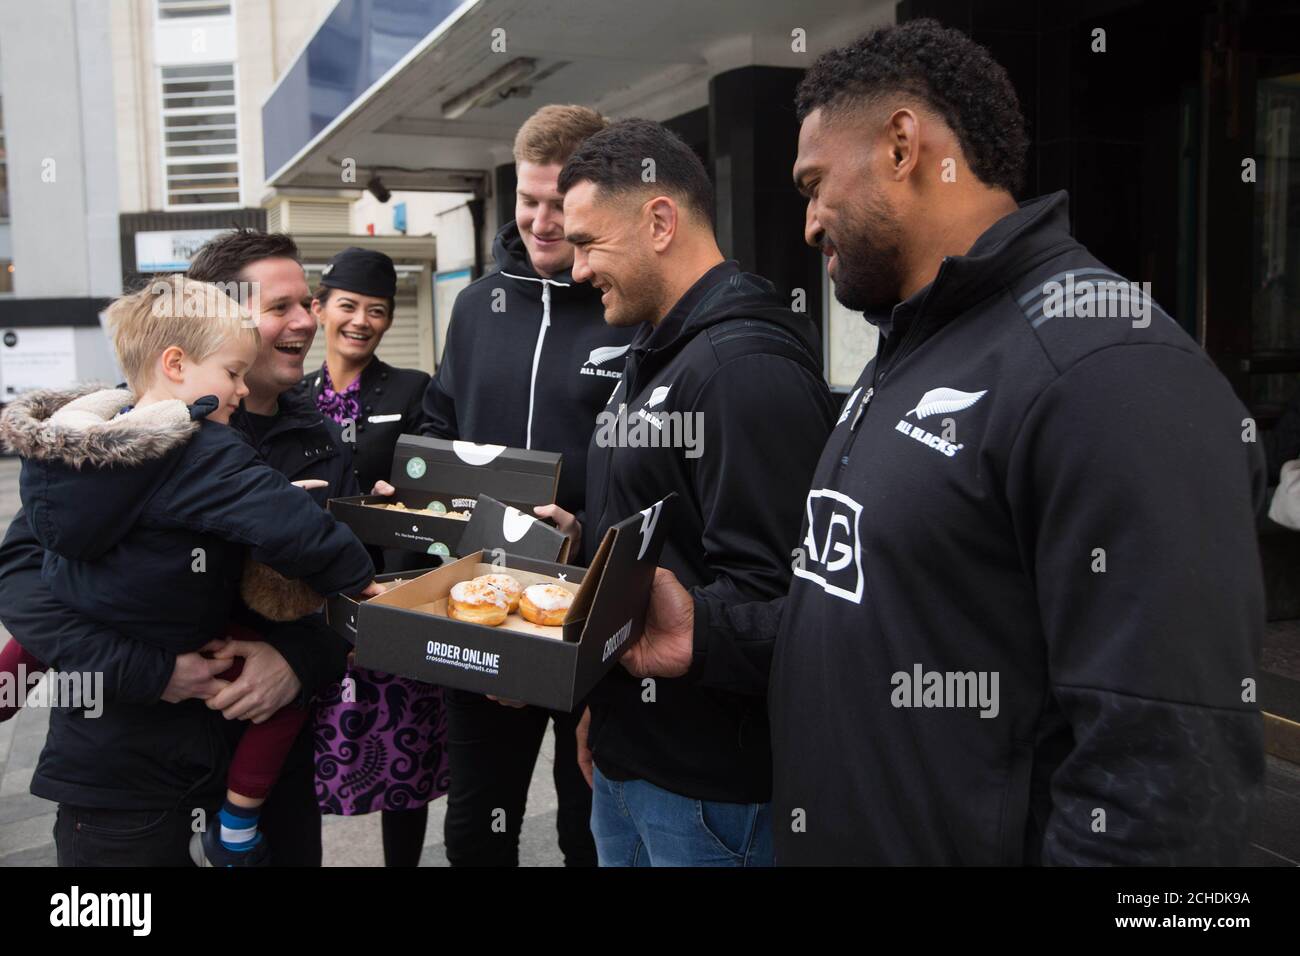 EDITORIAL USE ONLY All Blacks rugby stars Jordie Barrett, Codie Taylor and Waisake Naholo with cabin crew Katrina Green take time out of their training schedule to give commuters in Richmond a